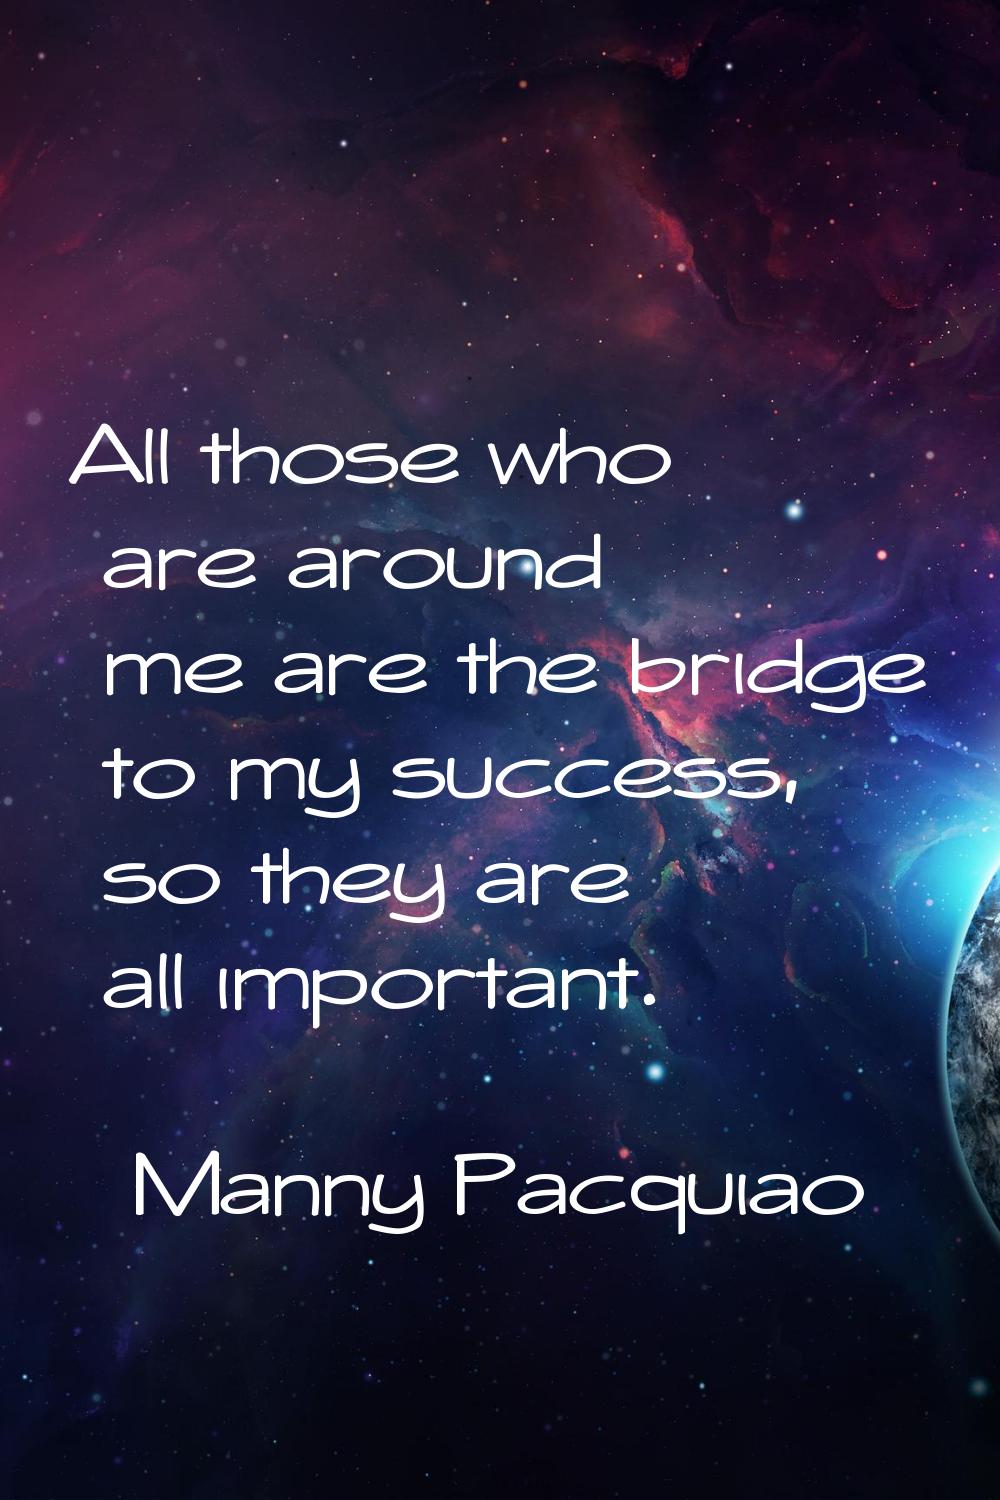 All those who are around me are the bridge to my success, so they are all important.